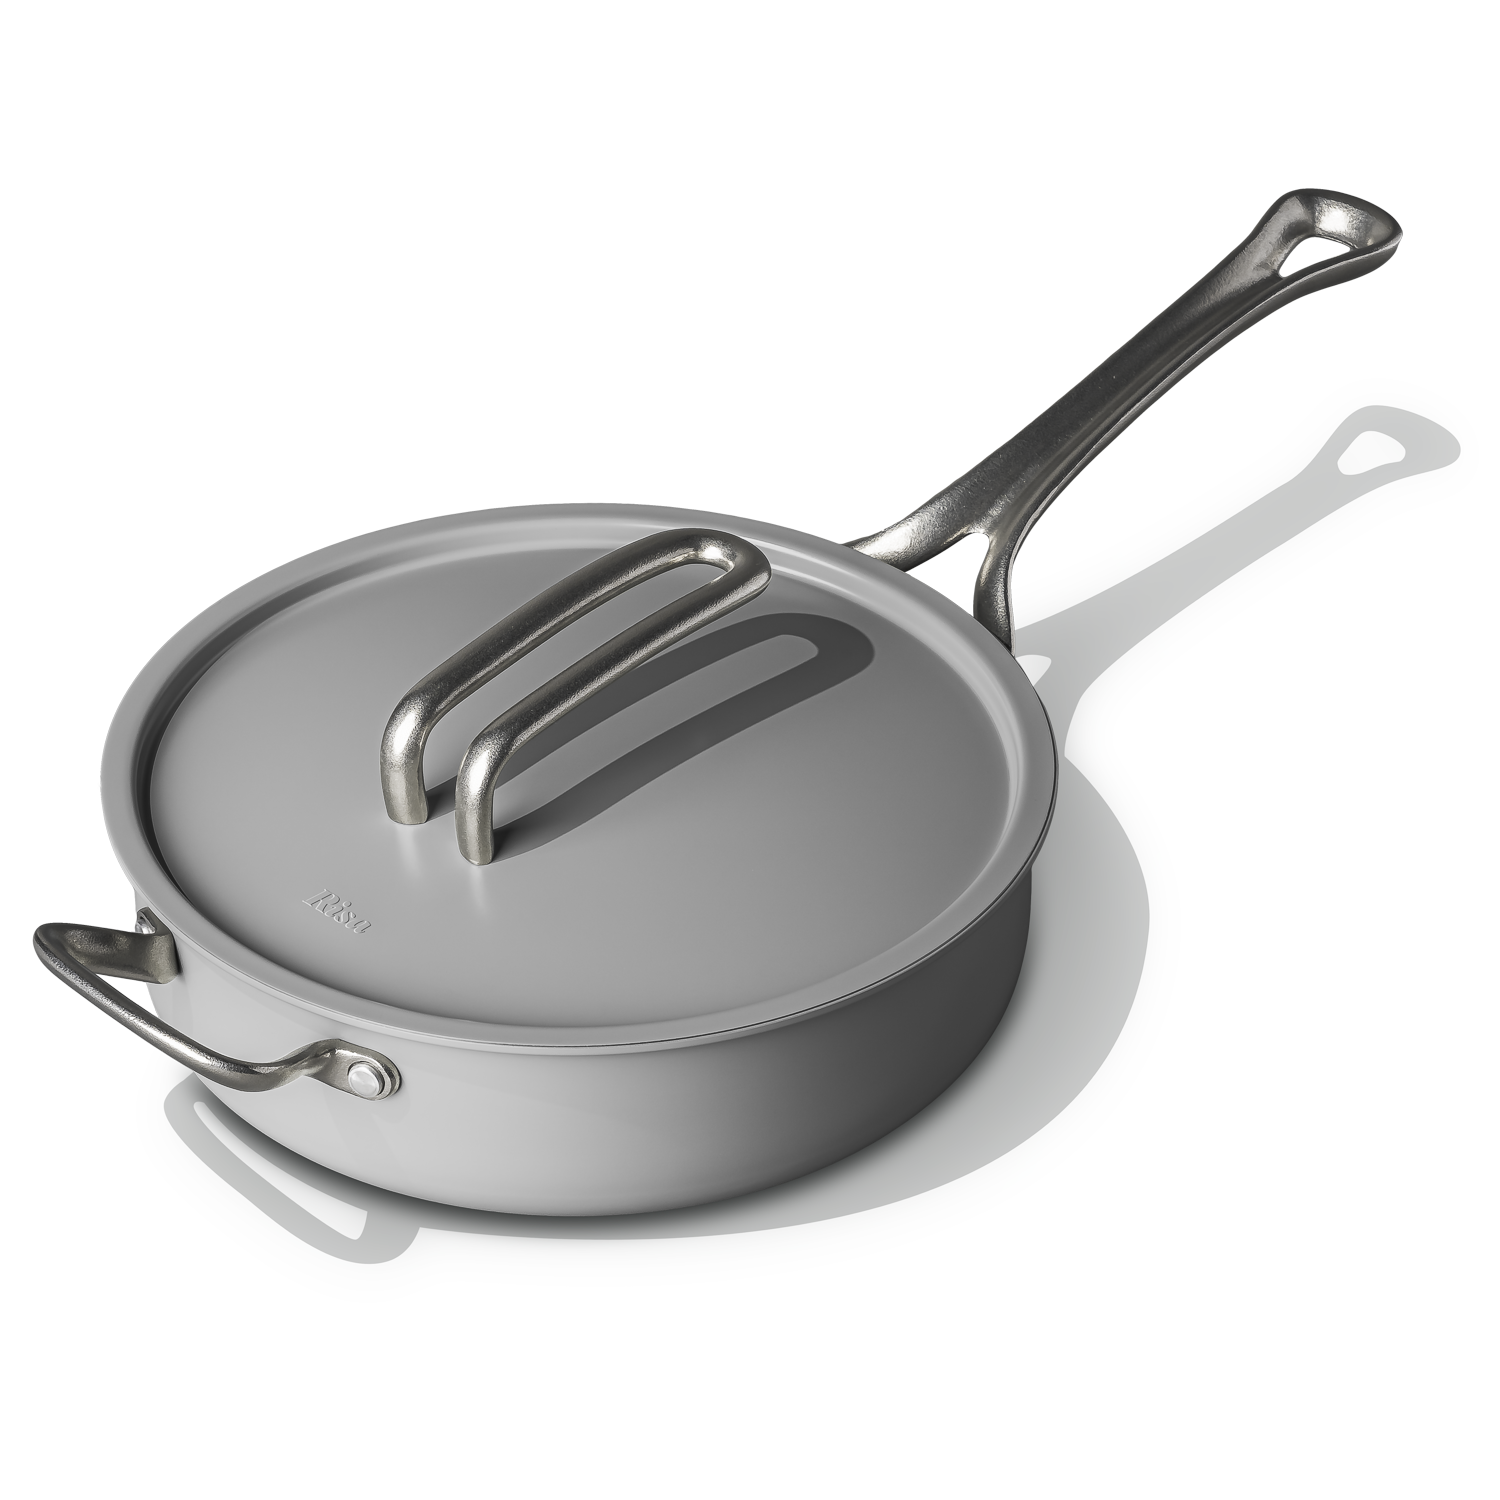 SEE VIDEO BELOW! - Risa Signature - Co-founded by Eva Longoria - 4 Piece  Aluminum Non-Stick Non-Toxic Ceramic Coating Cookware Set - Goes directly  from stove to oven - $125 at Target (